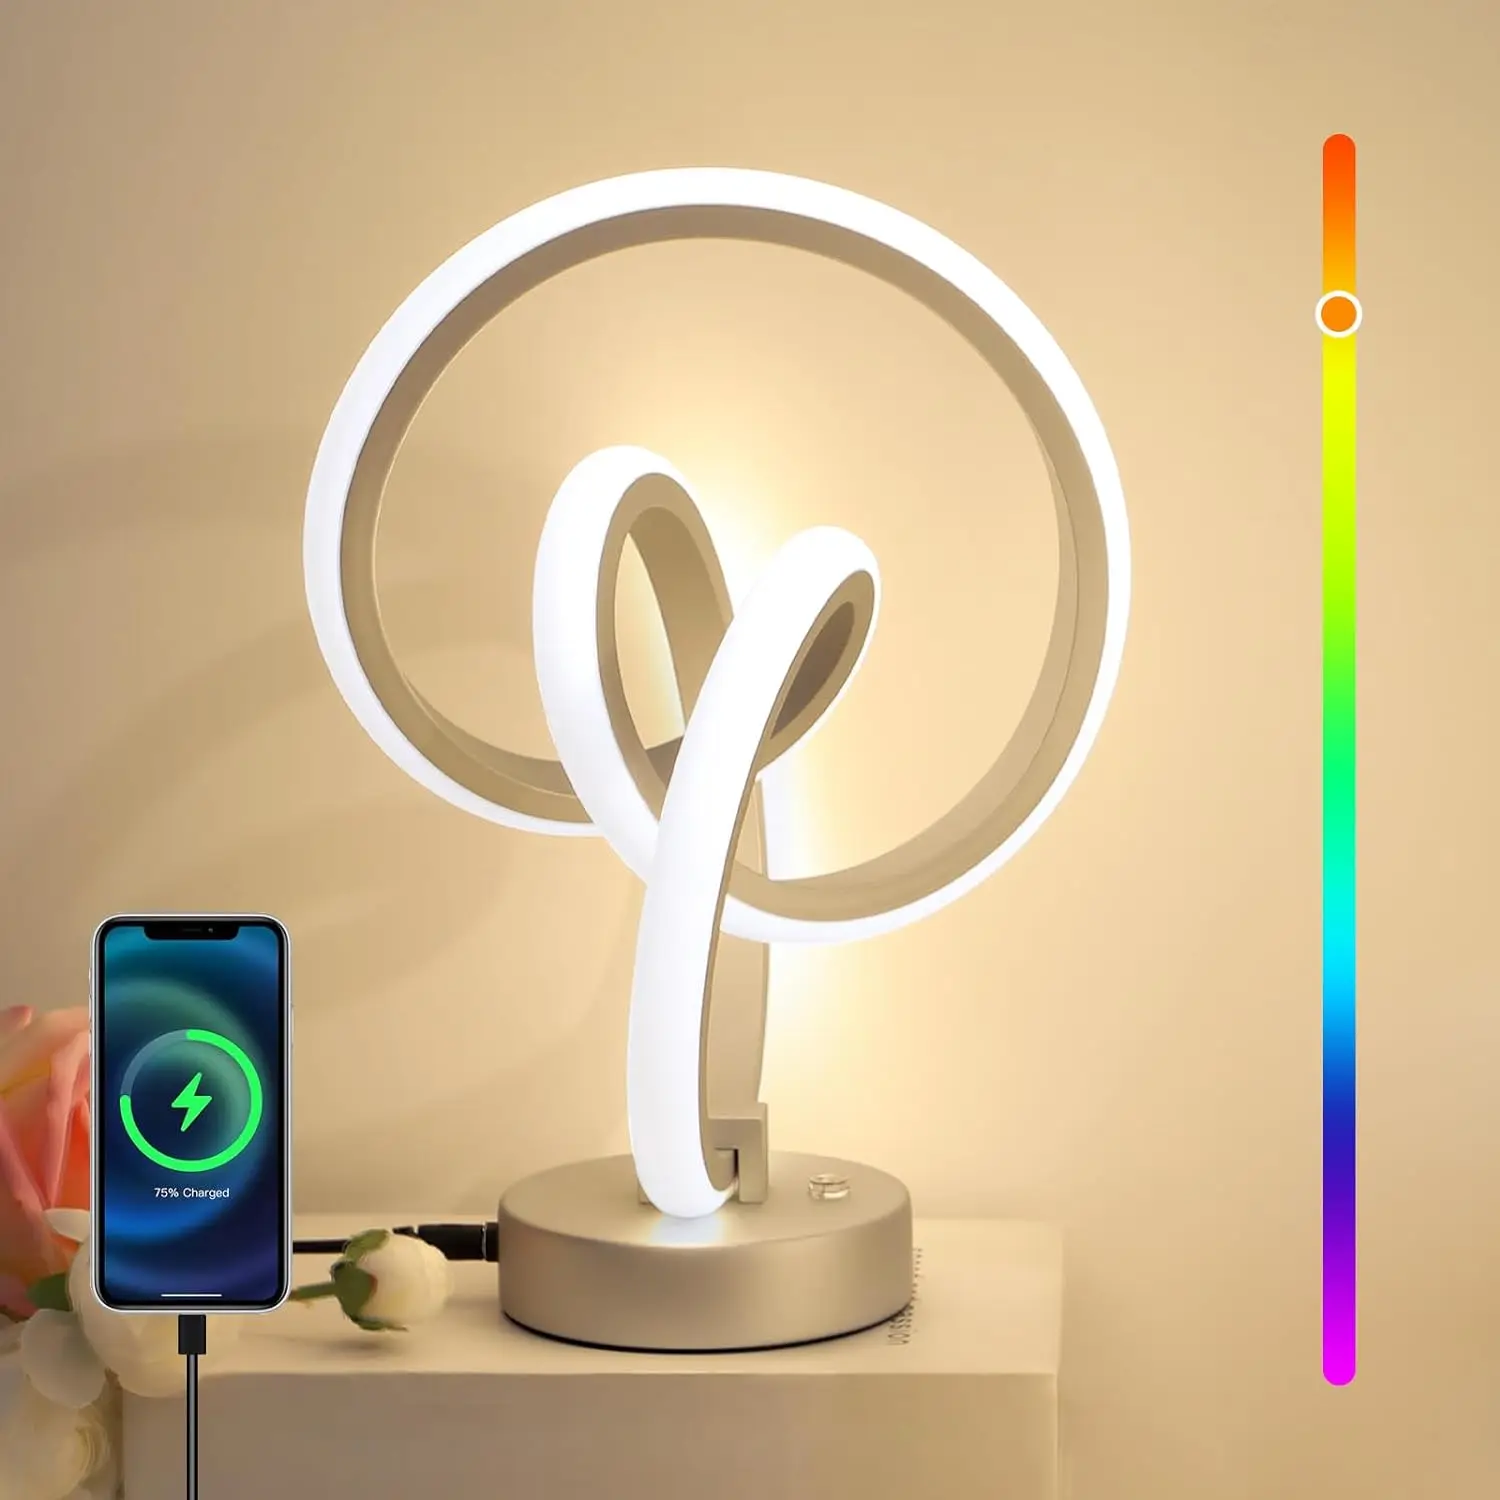 

Lightess Modern Table Lamps,RGB Table Lamp,3 Dimmable Spiral LED Lamp with Memory Function,7 Colors 10 Light Modes Bedside Lamp